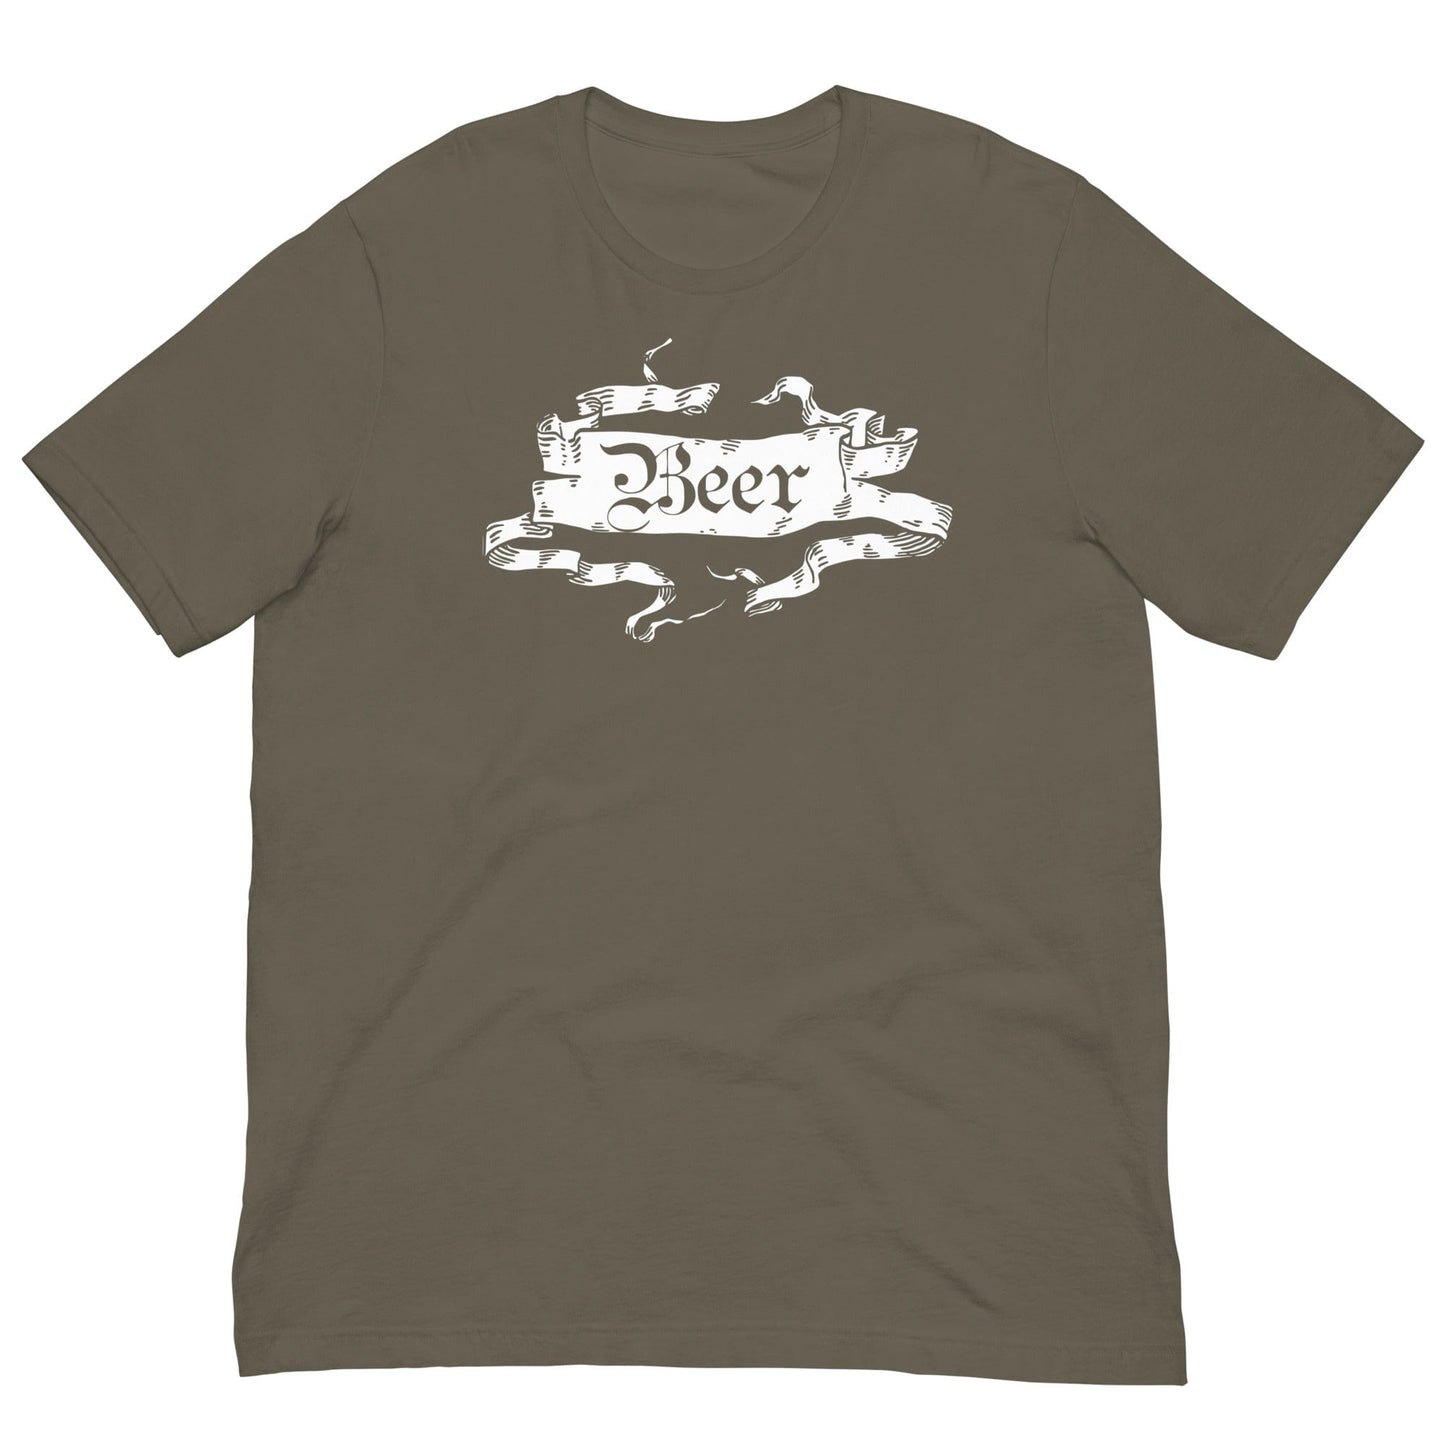 Medieval Beer T-shirt Army / S